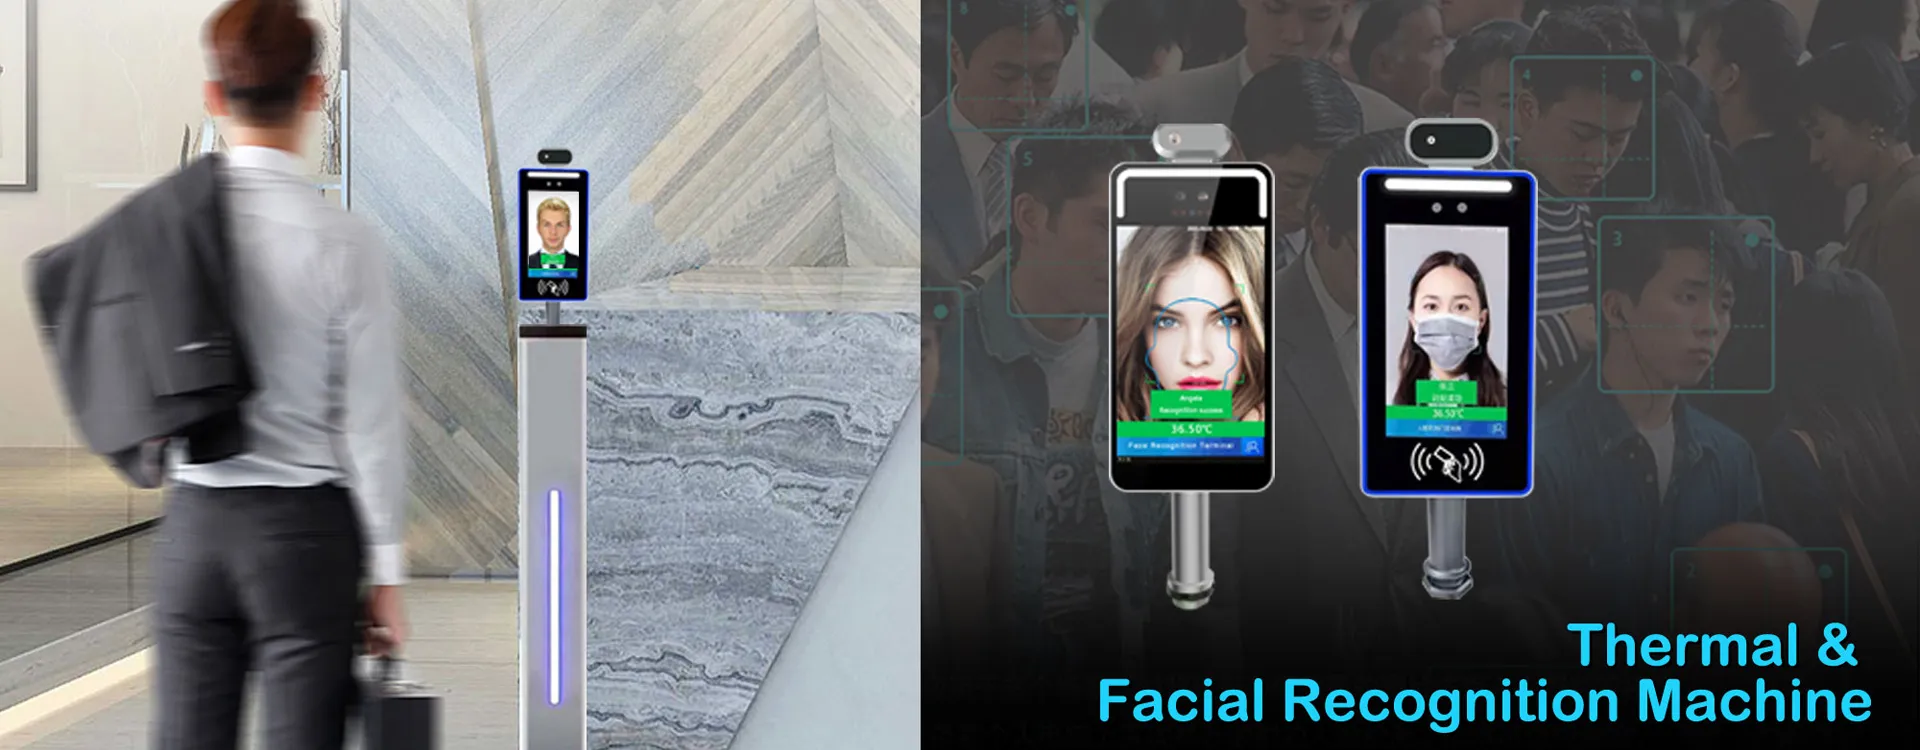 Facial recognition device